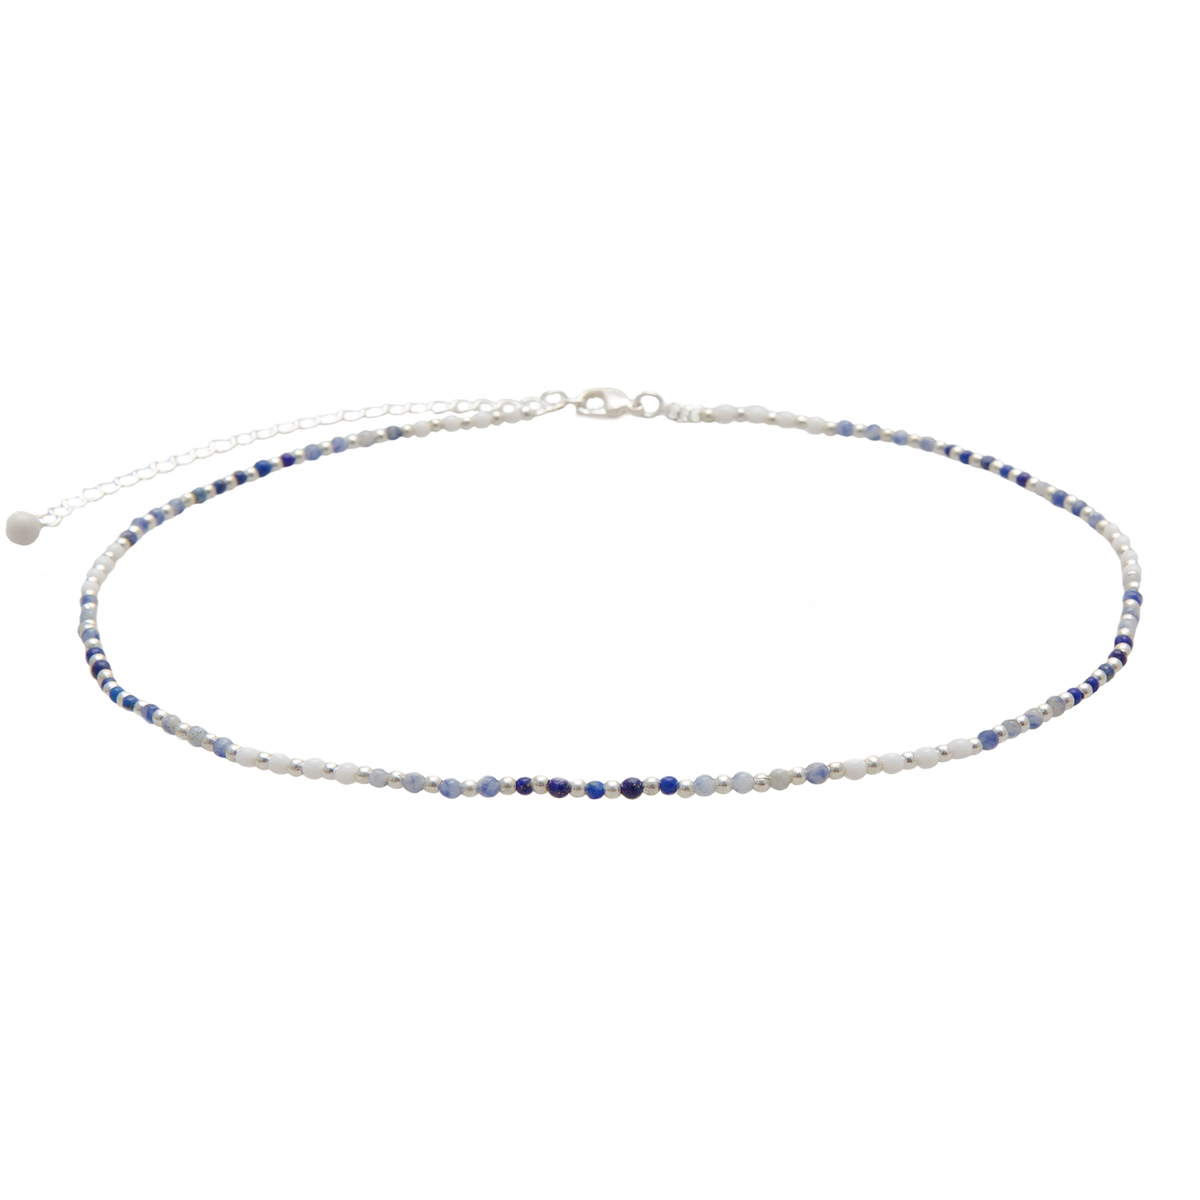 Wisdom 2mm + Moonstone Necklace Stack